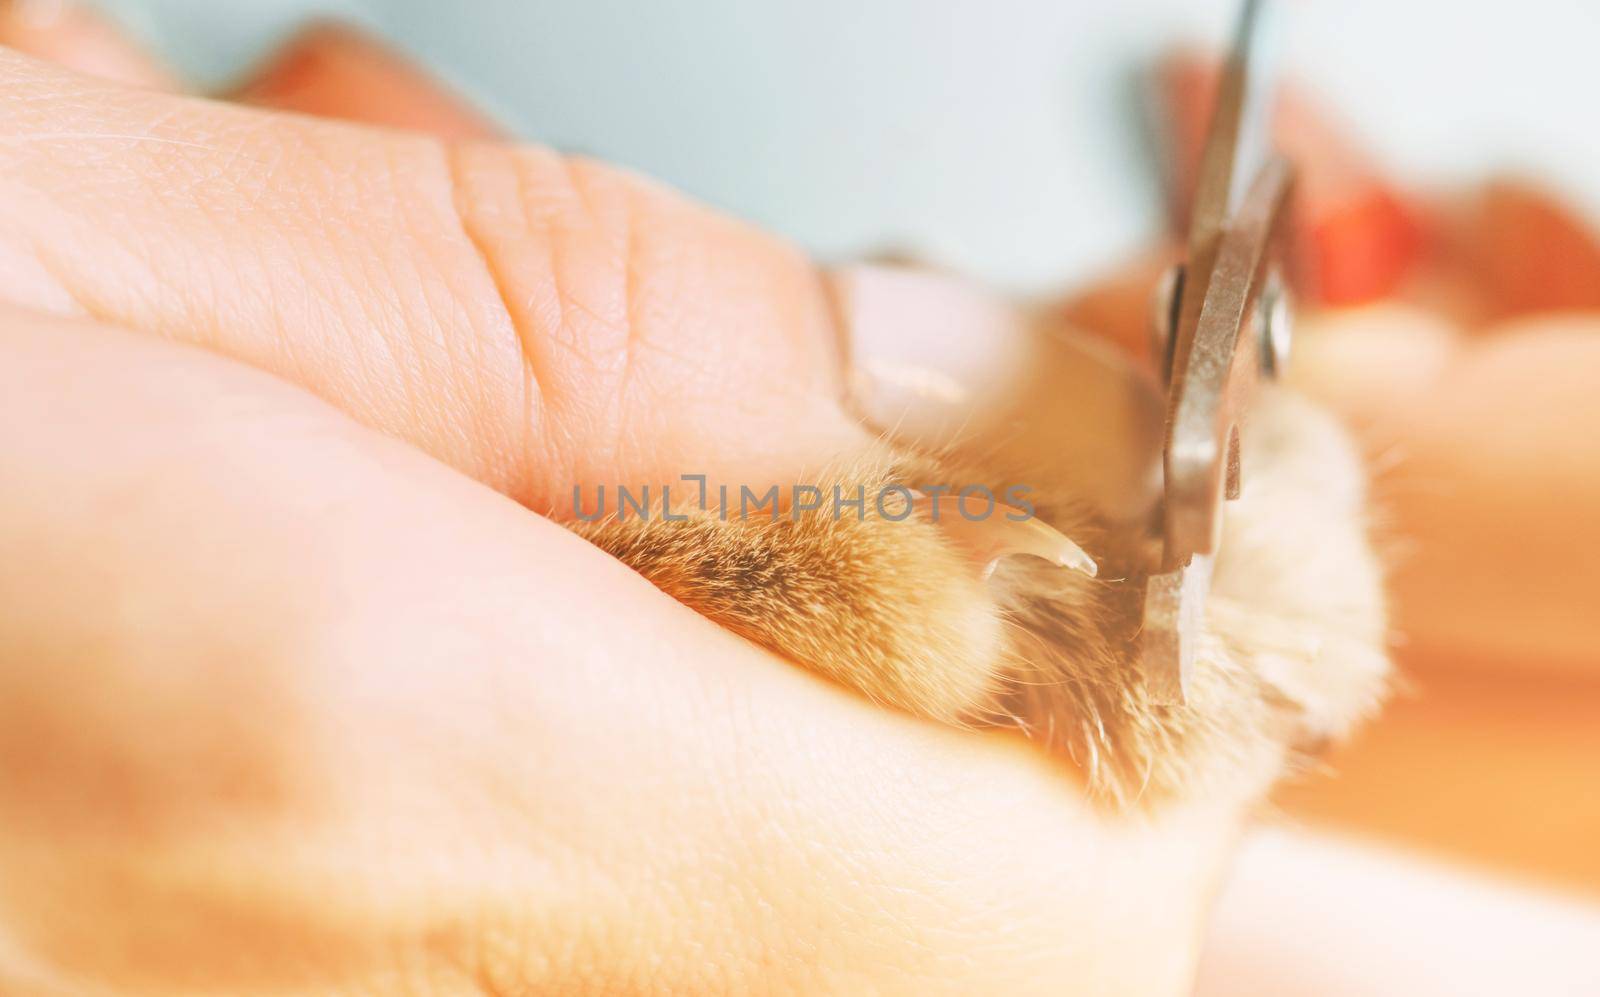 Woman trimming claws of domestic cat with clippers, view of hands.